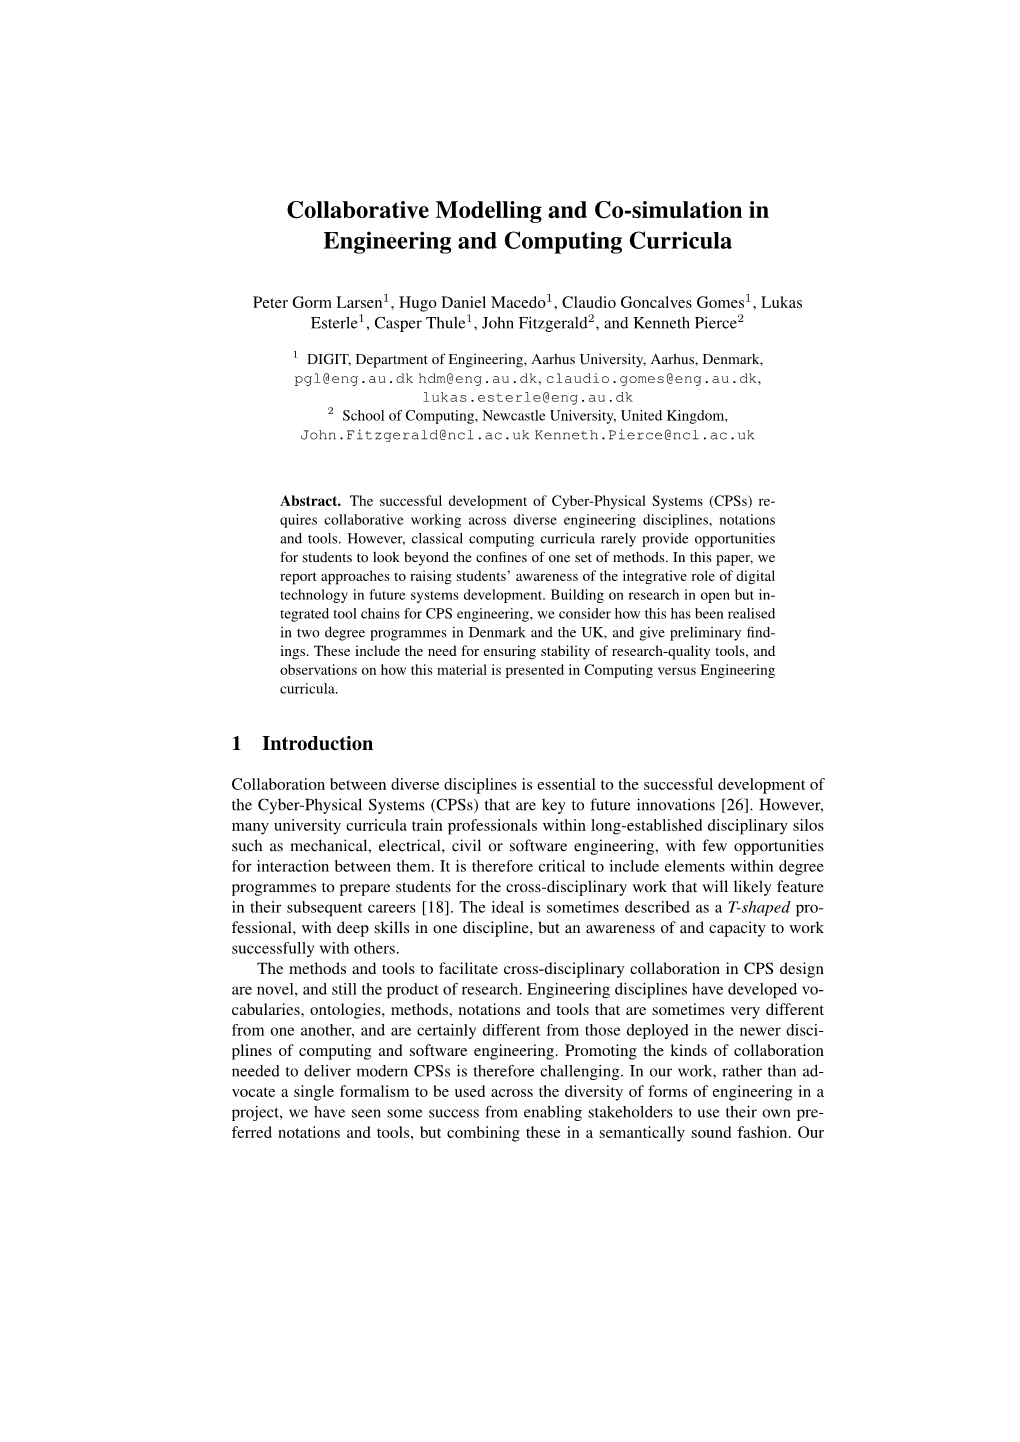 Collaborative Modelling and Co-Simulation in Engineering and Computing Curricula